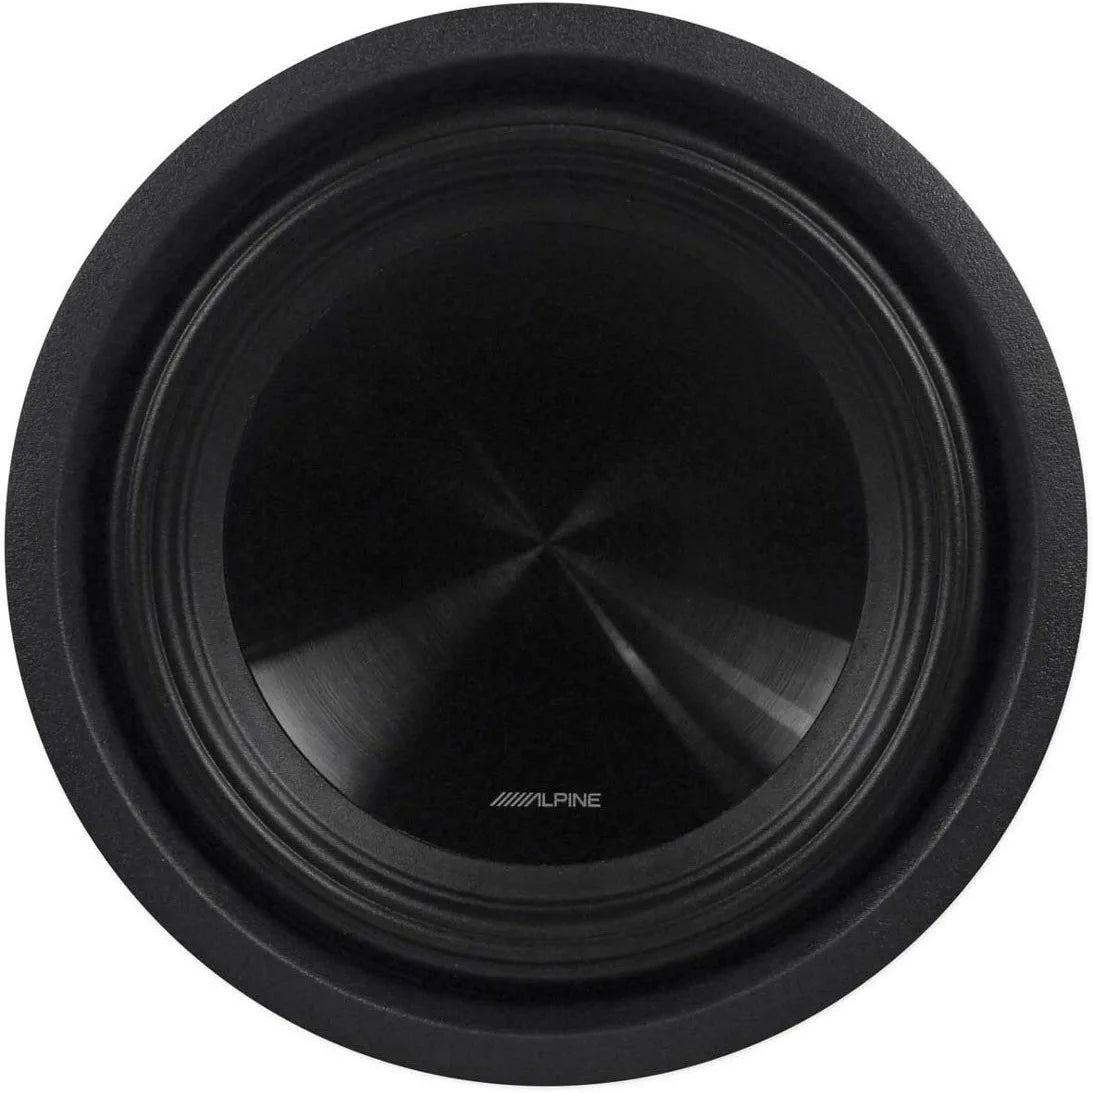 2 New Alpine SWT-10S4 10" 2000W Shallow Subwoofers Car Stereo Subs